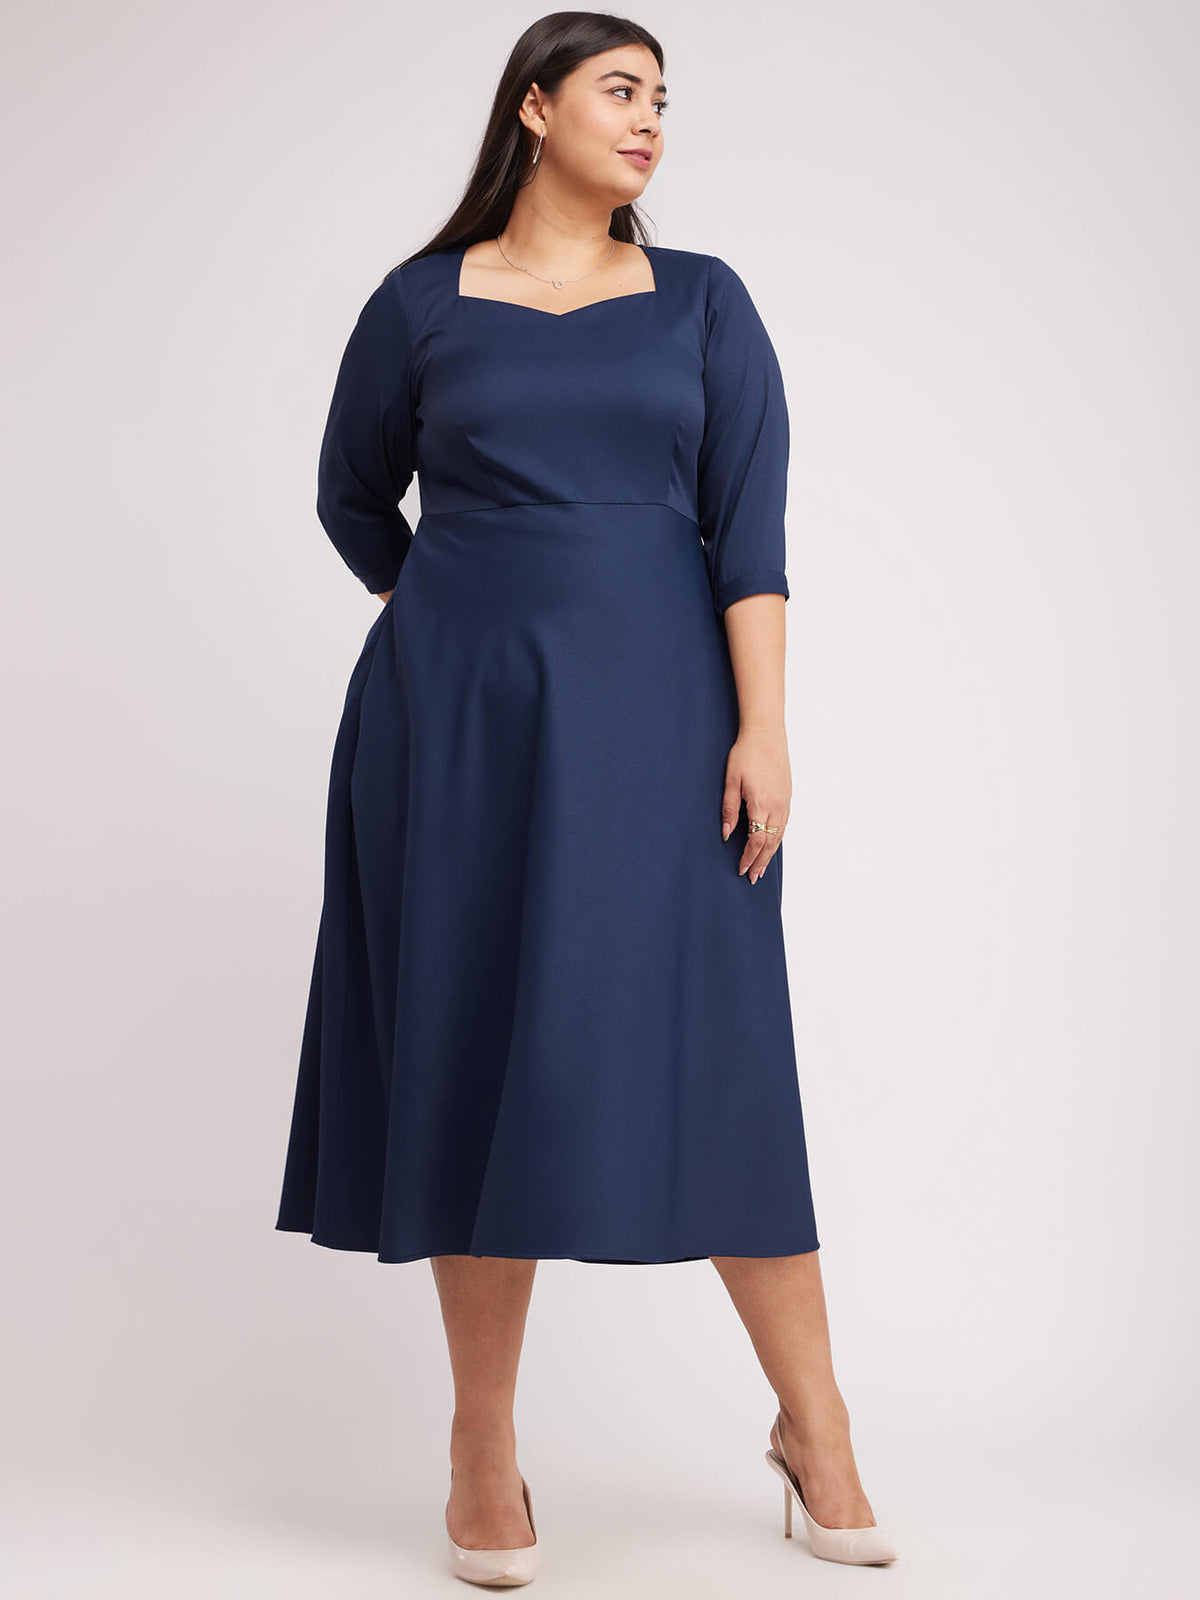 Fit And Flare Dress - Navy Blue